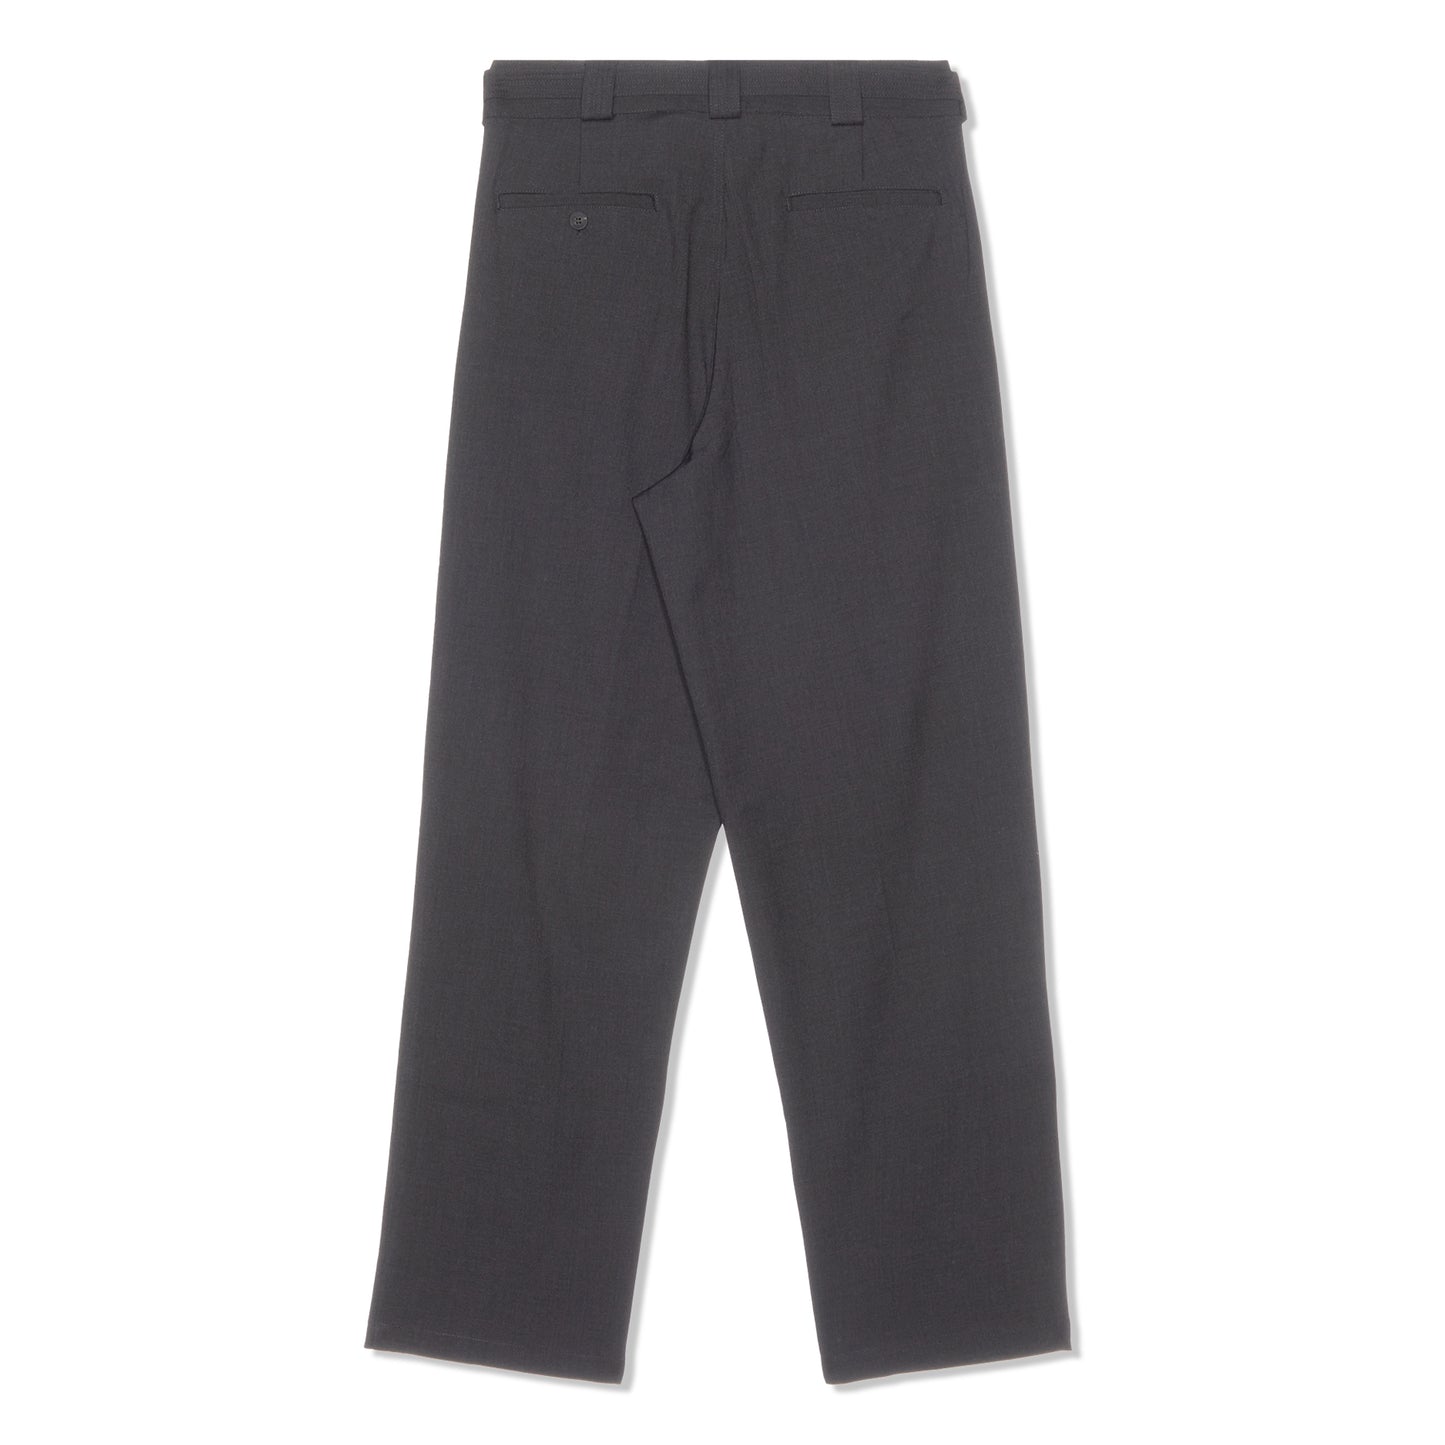 Beach Brains Pleated Suit Pant (Charcoal)